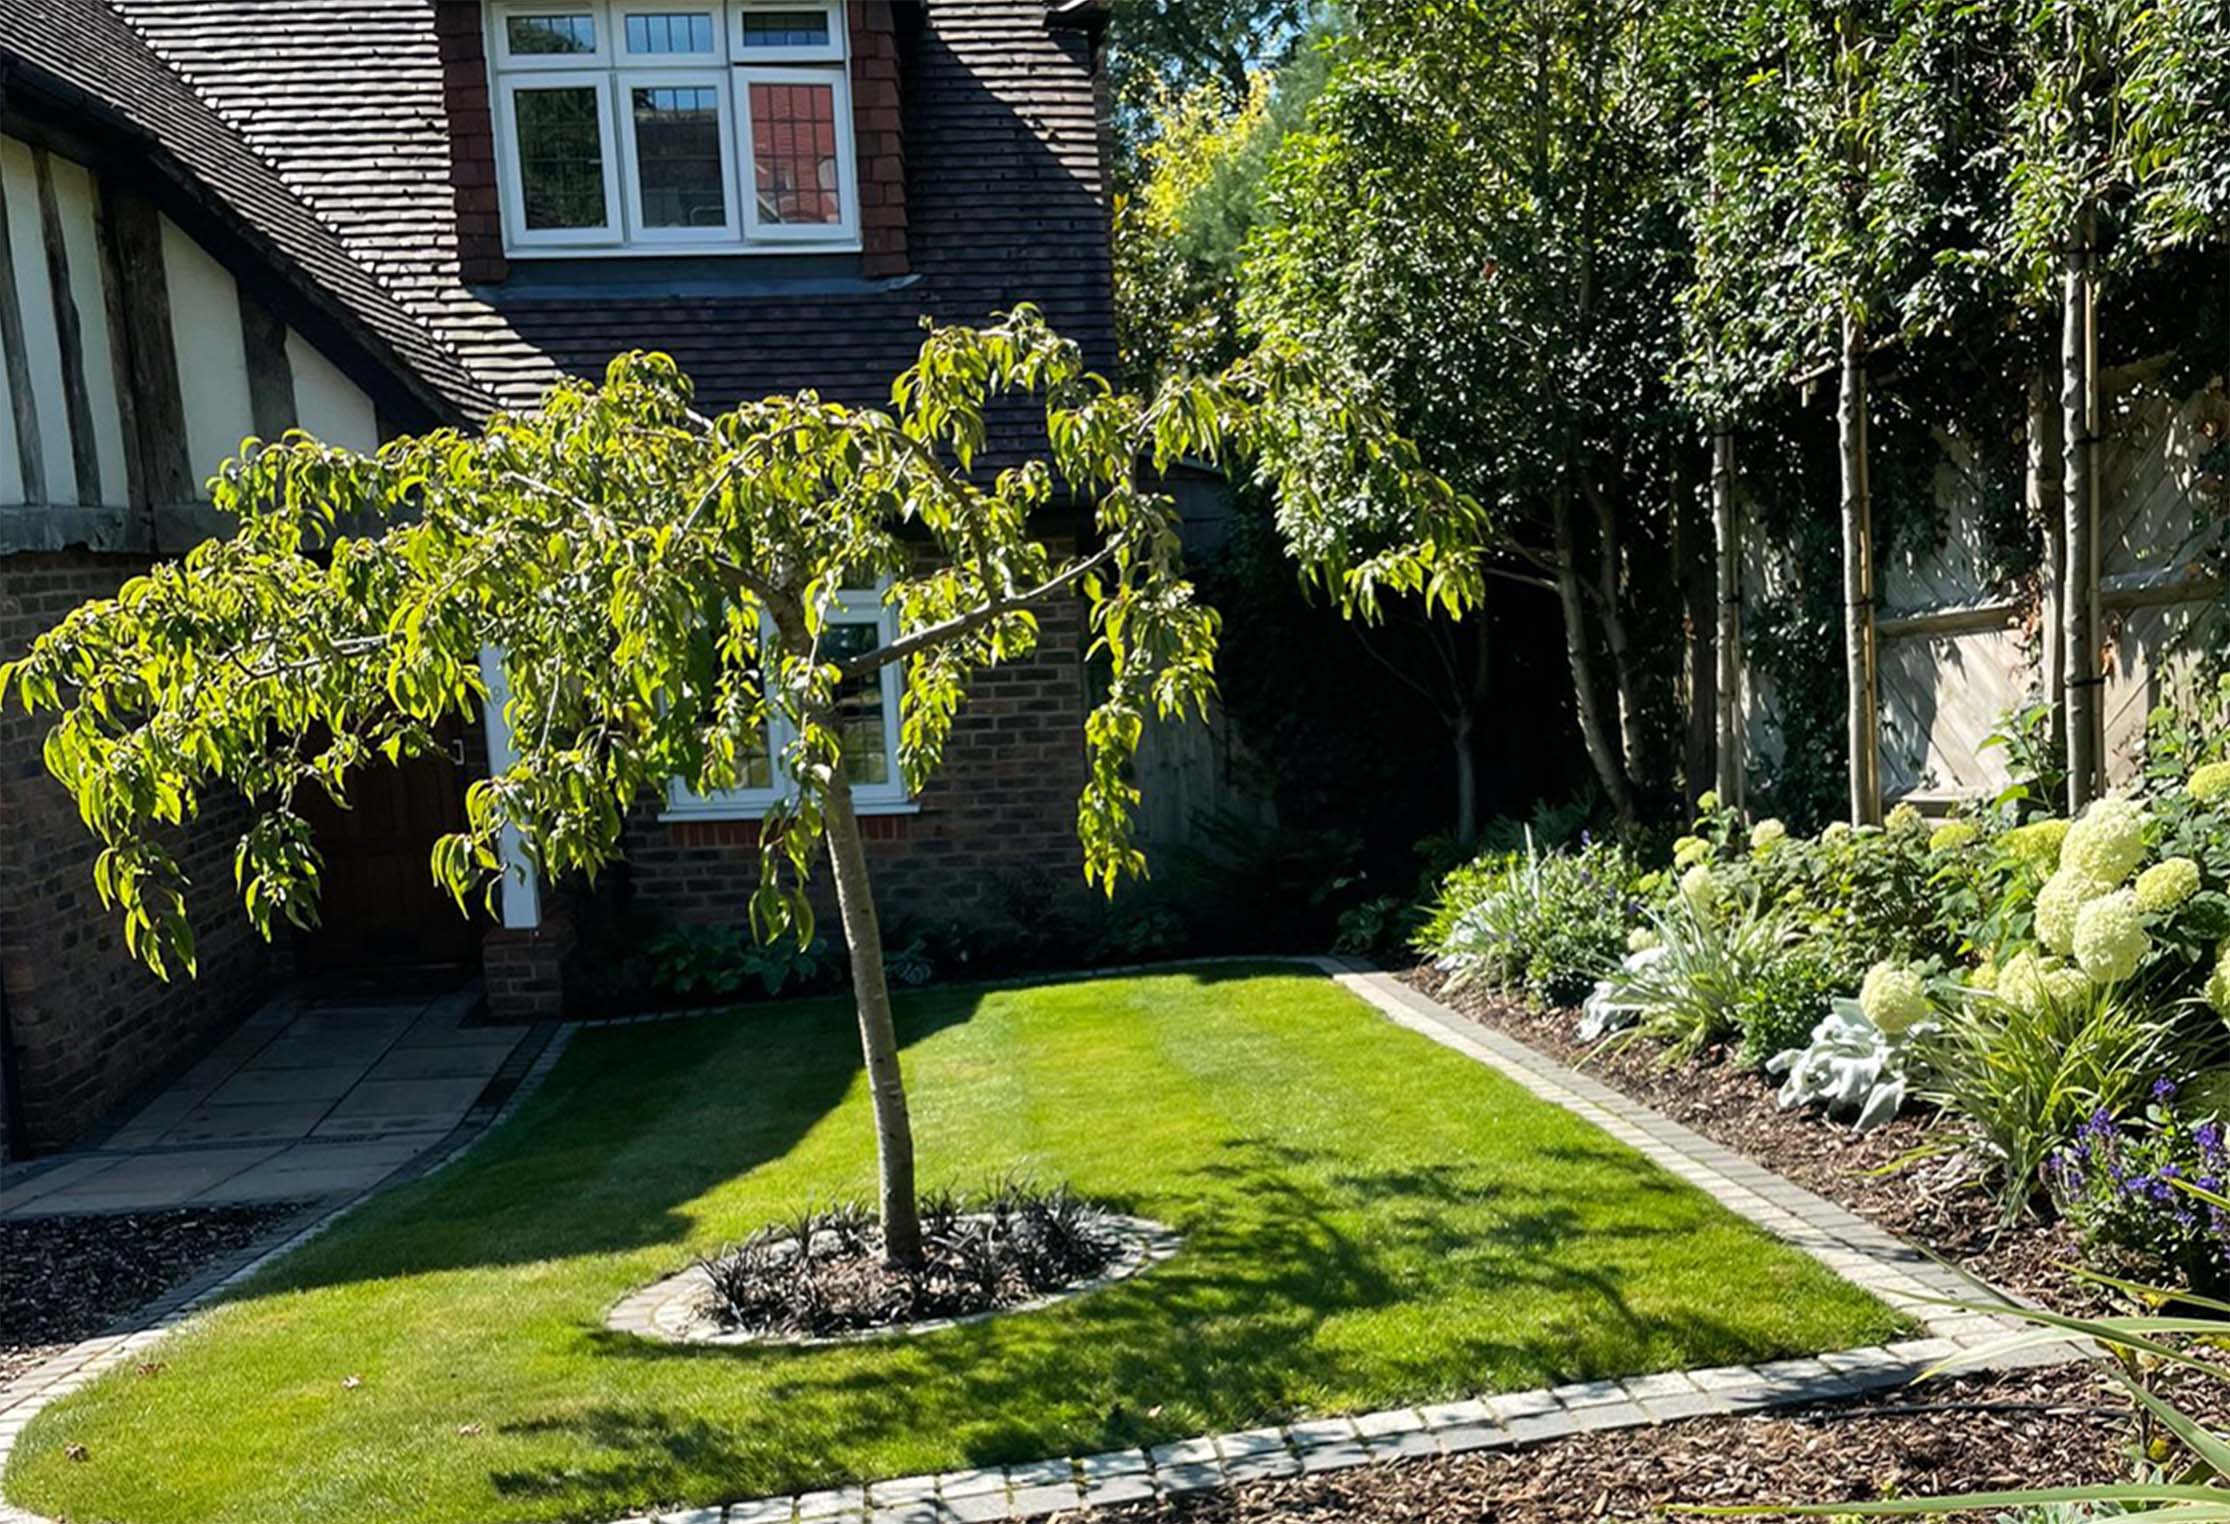 A solo planted tree in a back garden surrounded by an ornate stone arrangement on a well-mainted lawn done by the Willow Alexander Gardens team